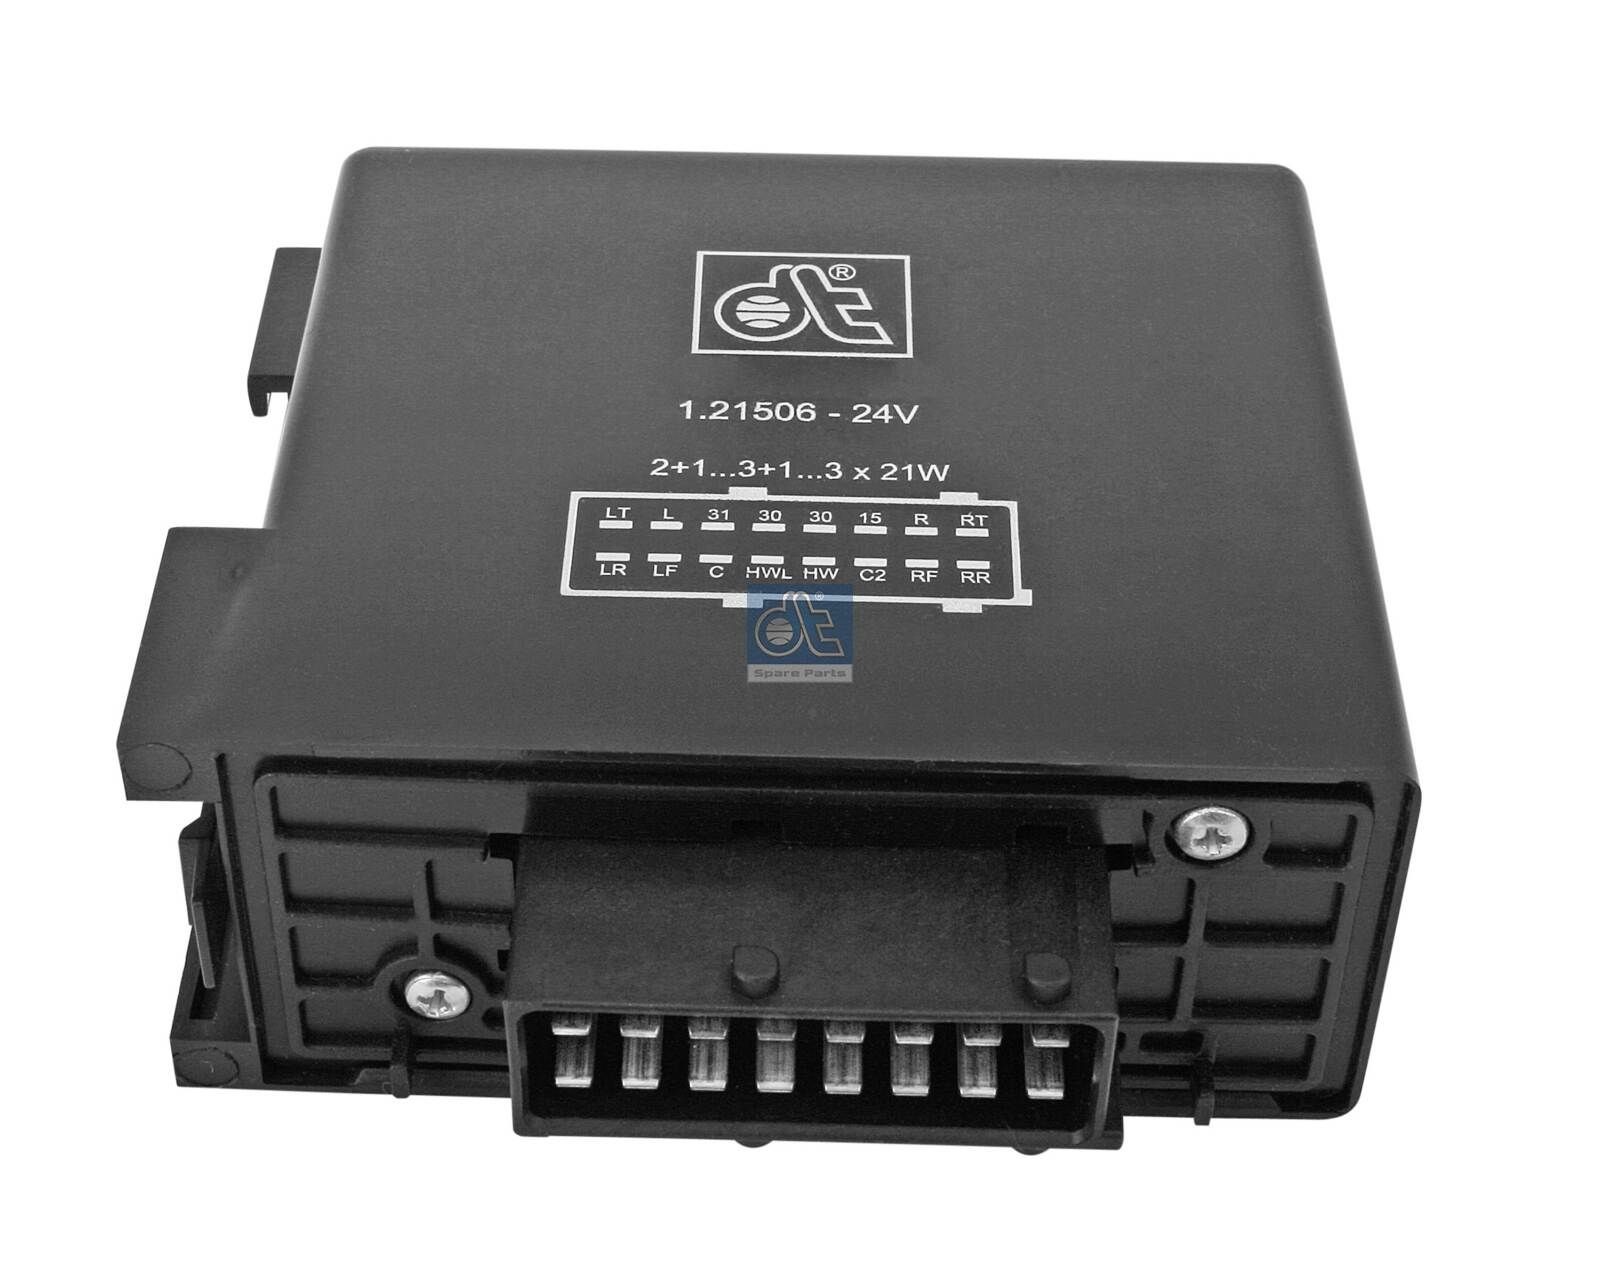 4DN 007 431-021 DT Spare Parts 24V, 21W, Electronic, 2+1...3+1...3 x 21 W Flasher unit 1.21506 buy